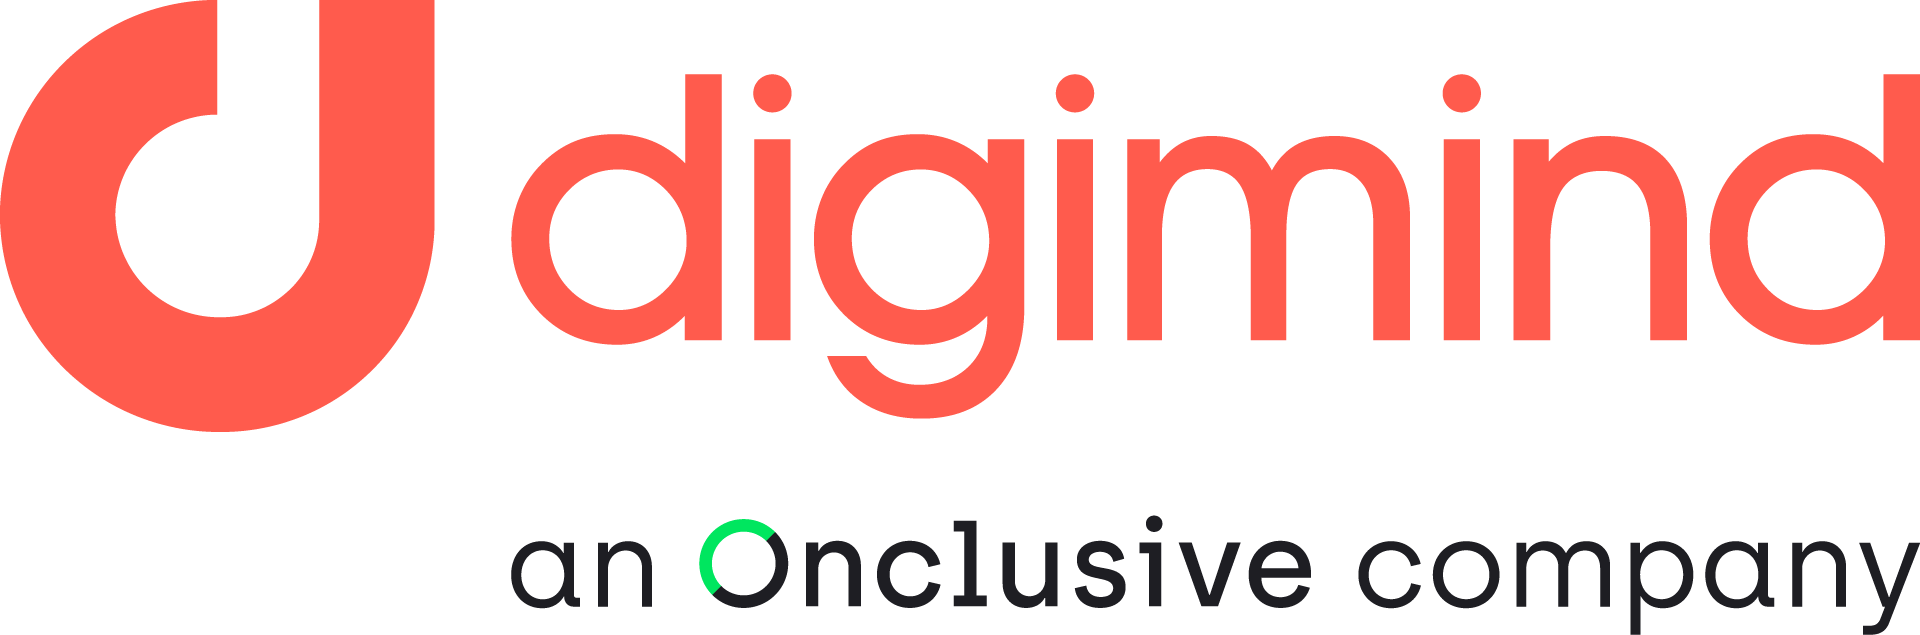 Digimind – An Onclusive Company